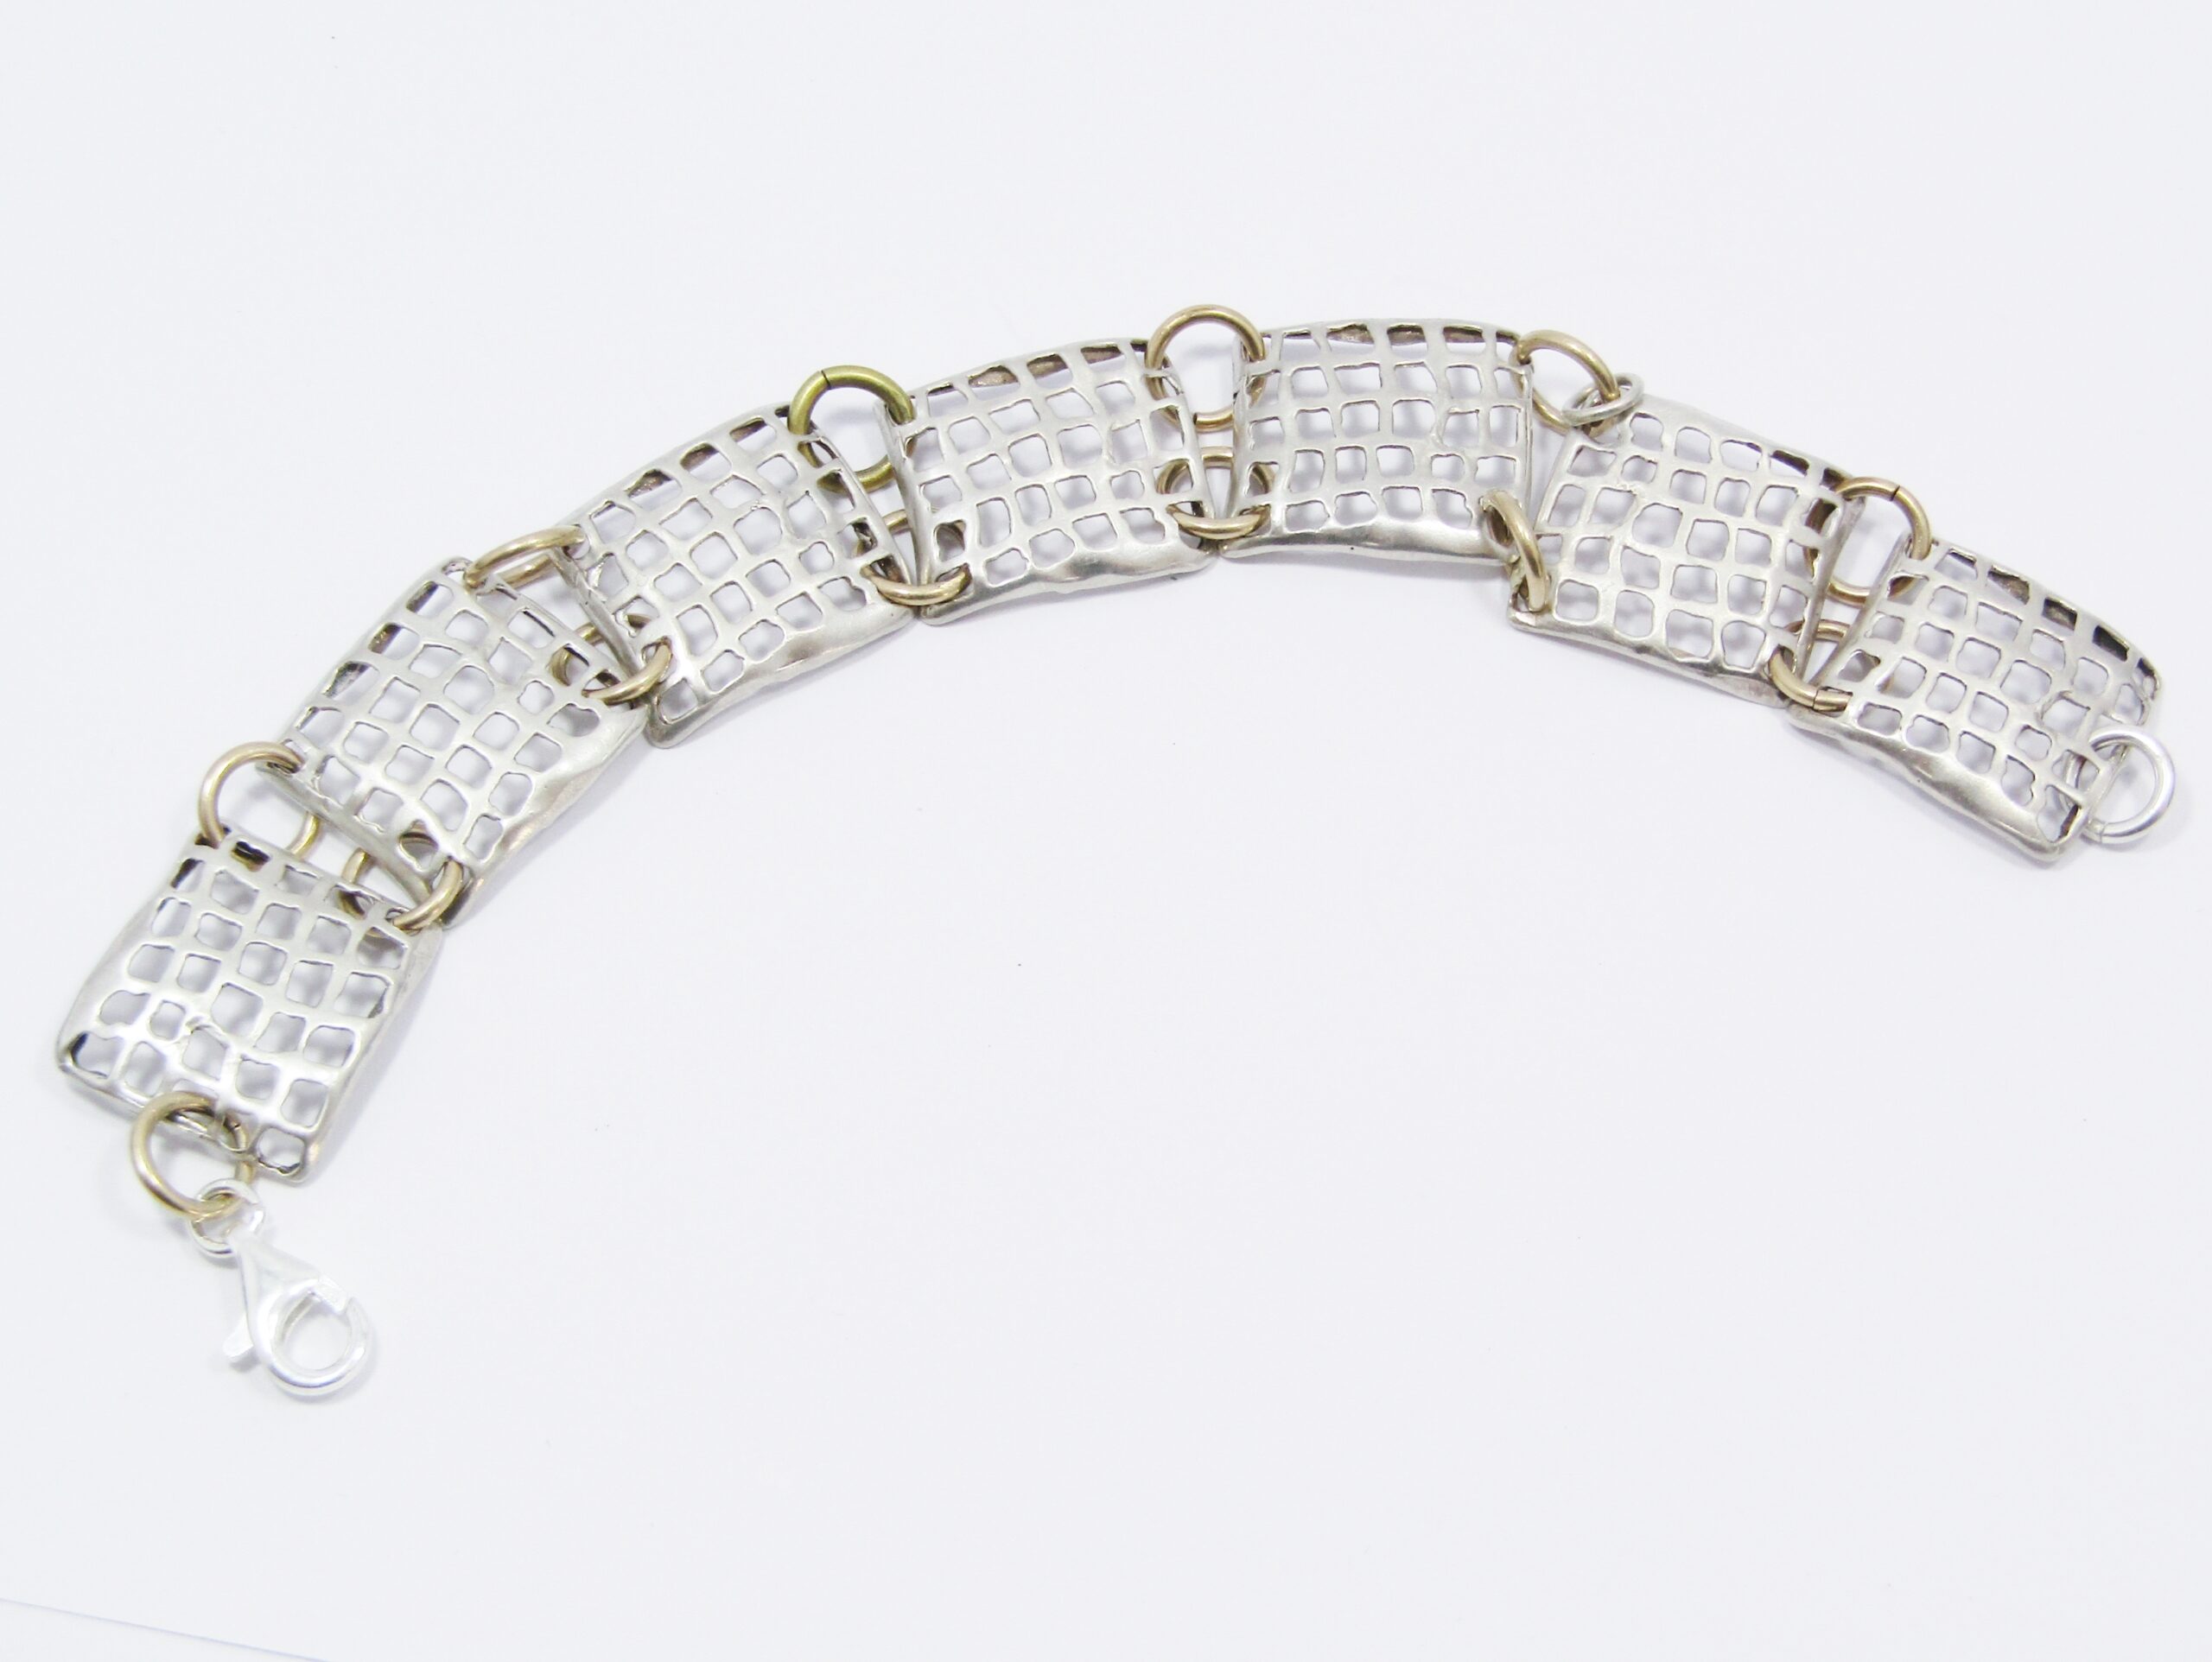 A Lovely Broad Two Tone Mesh Design Bracelet in Sterling Silver.